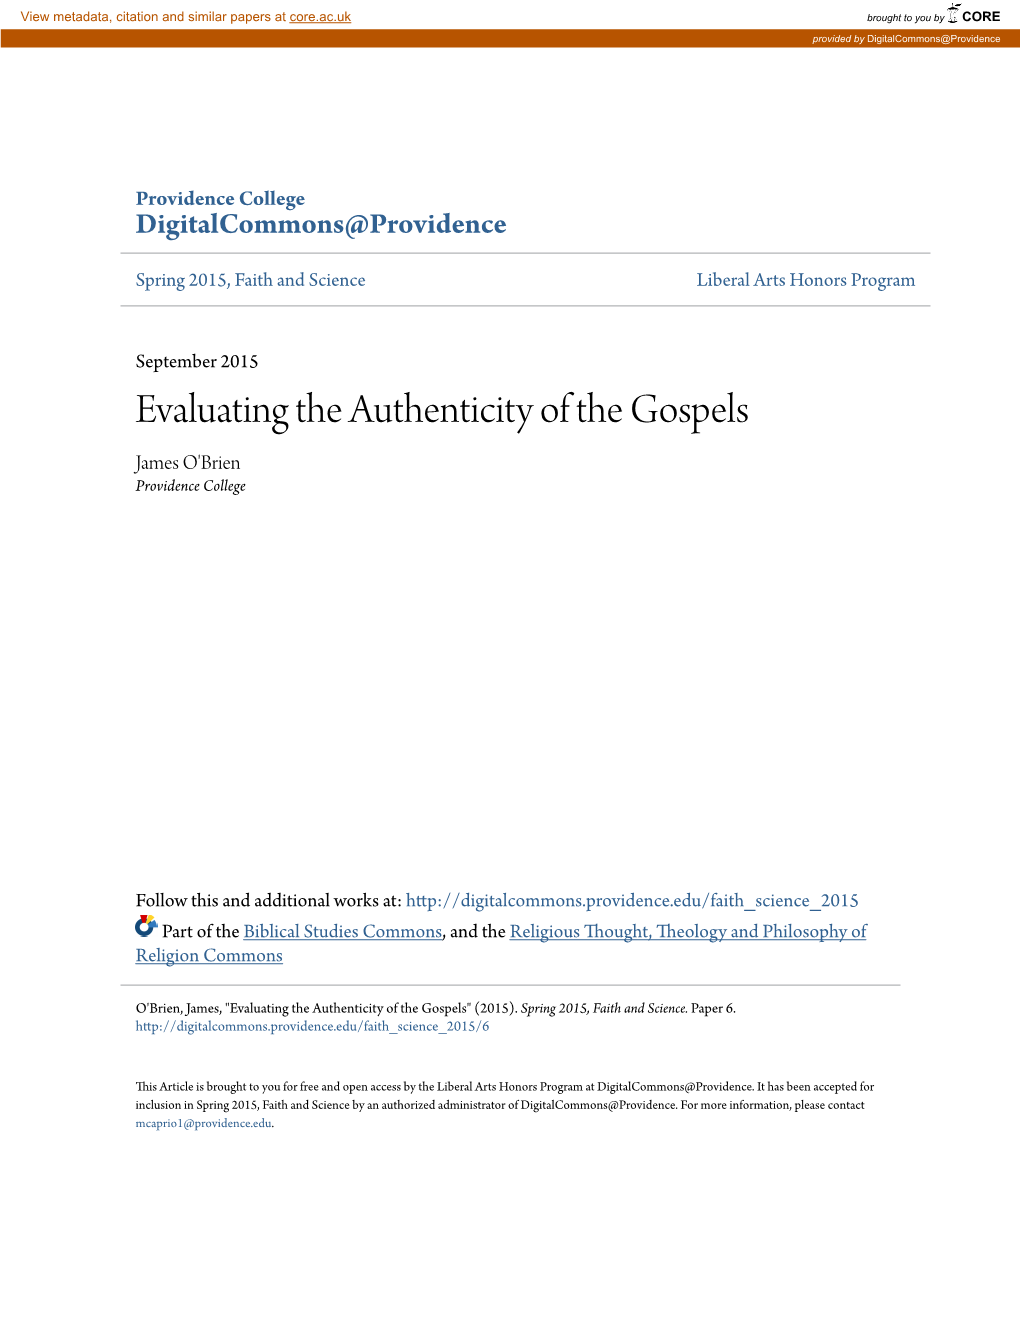 Evaluating the Authenticity of the Gospels James O'brien Providence College